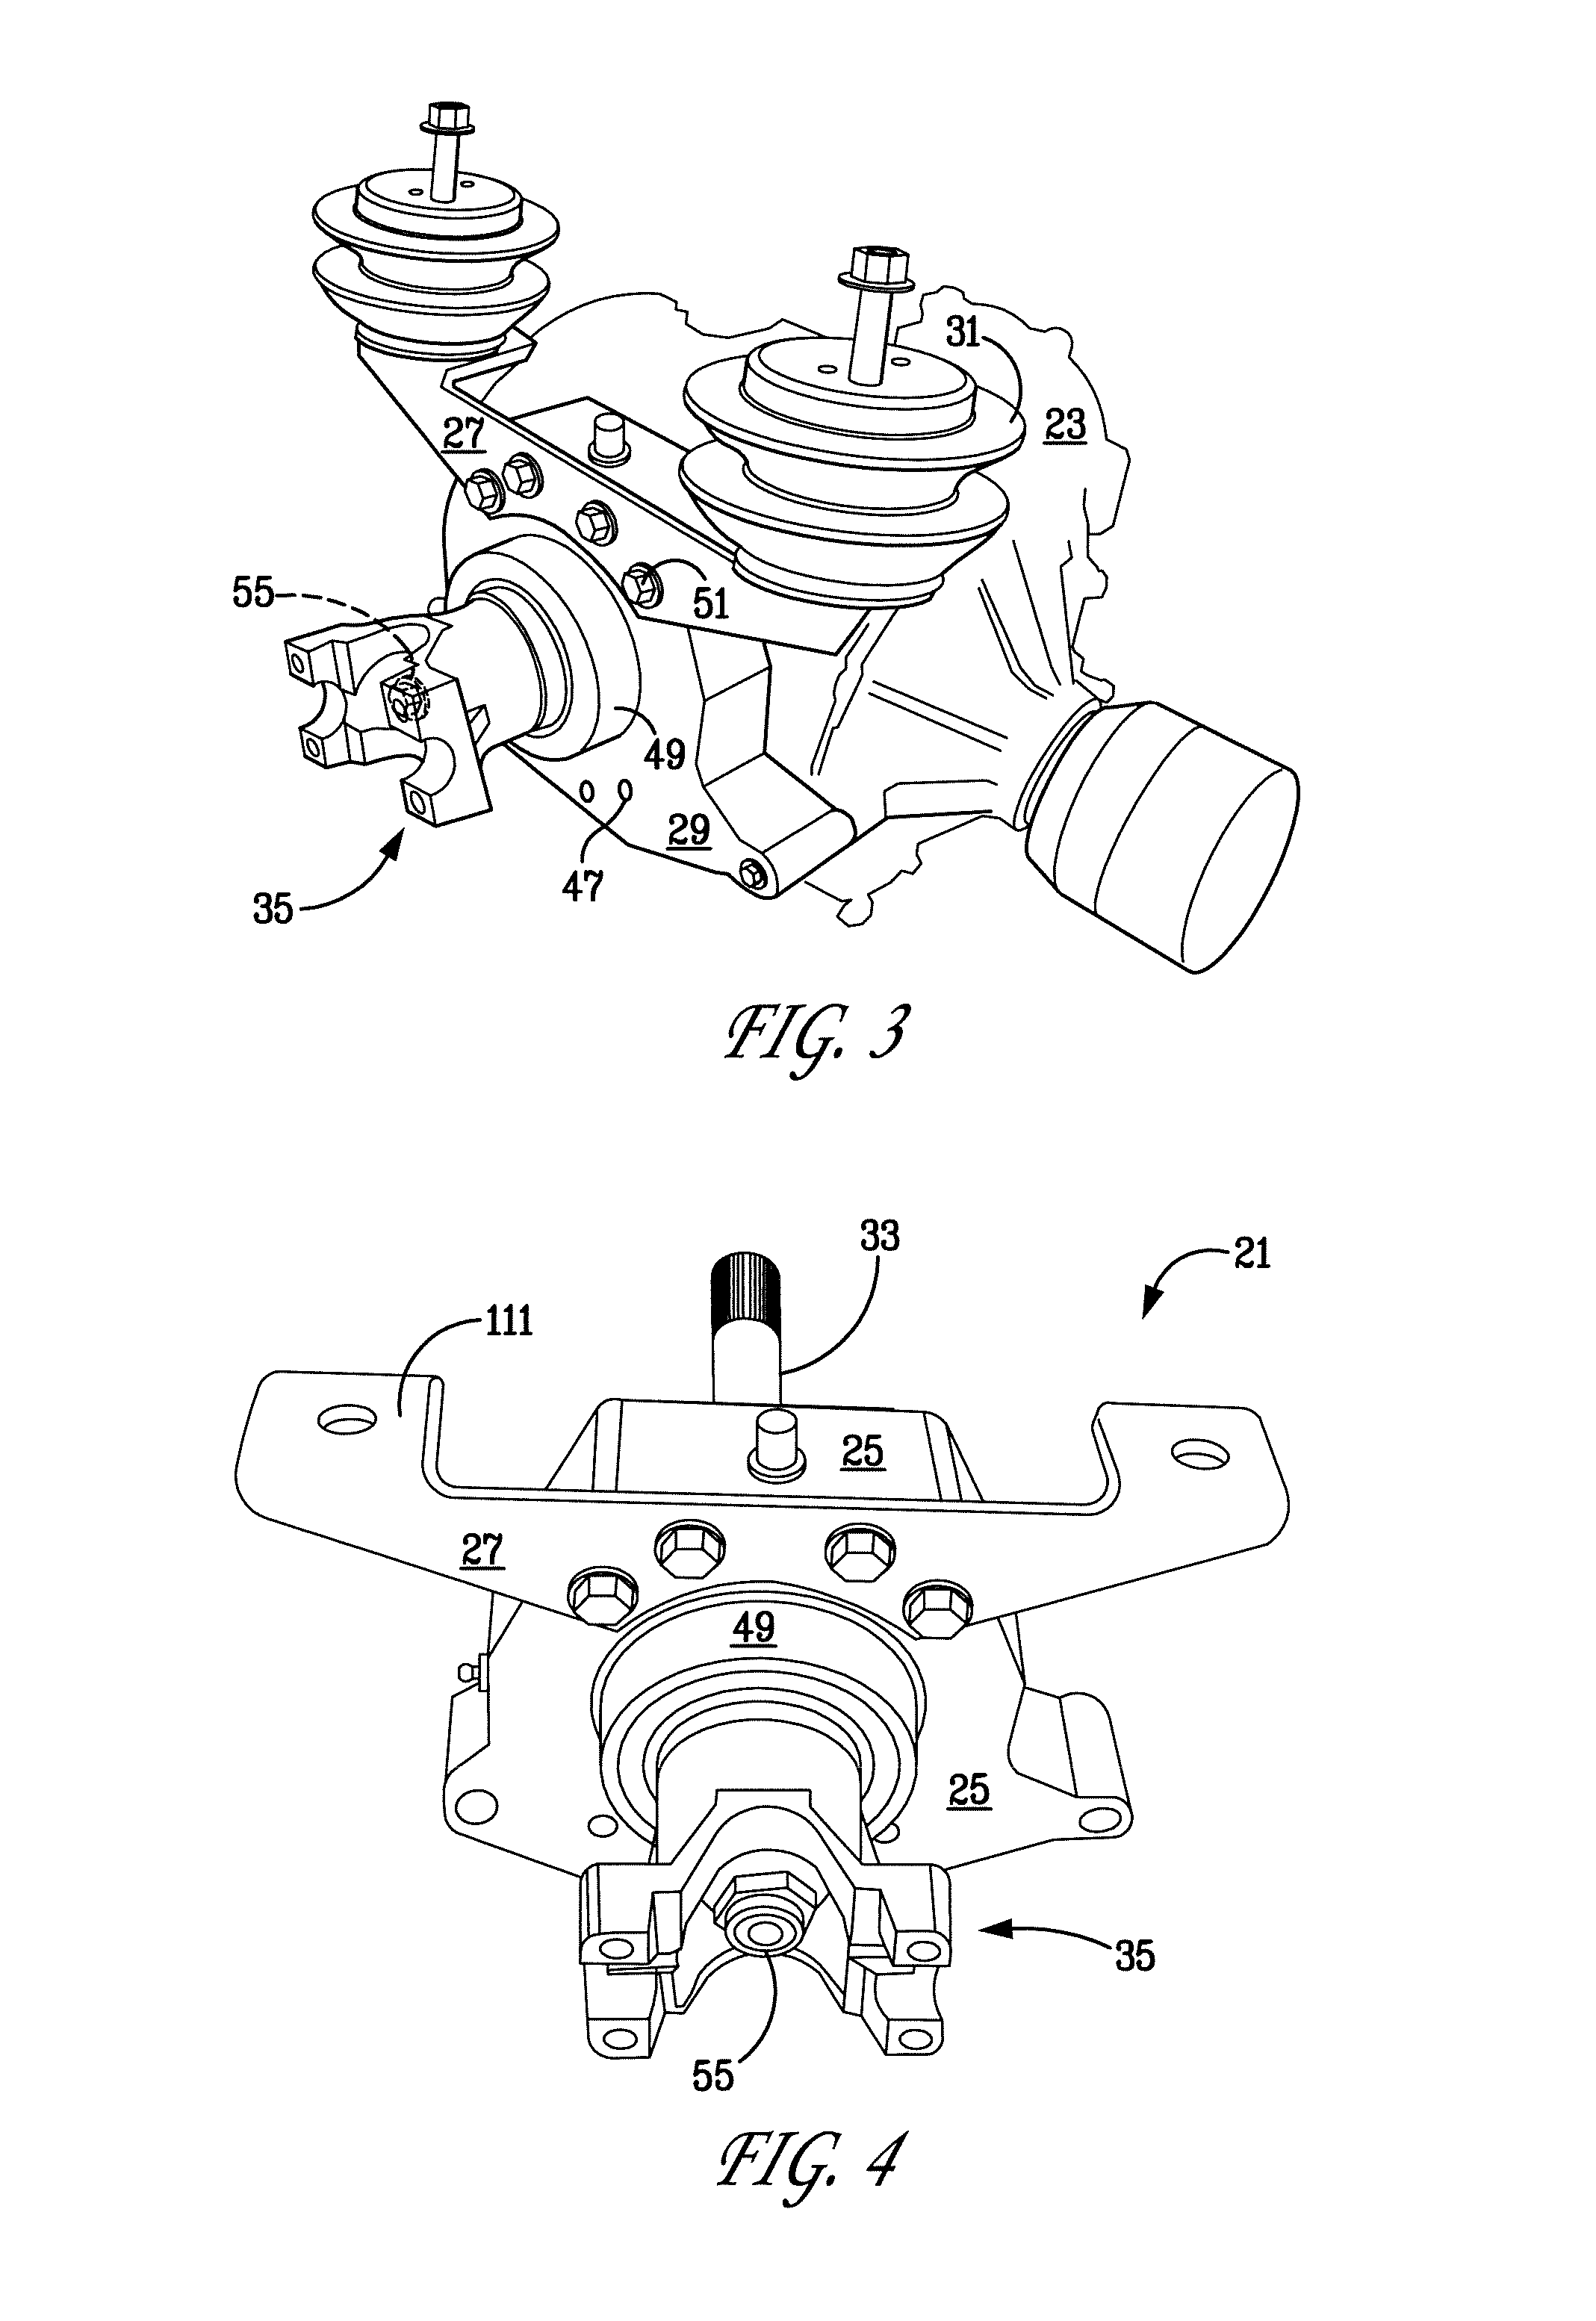 Adapter for a corvette rear differential